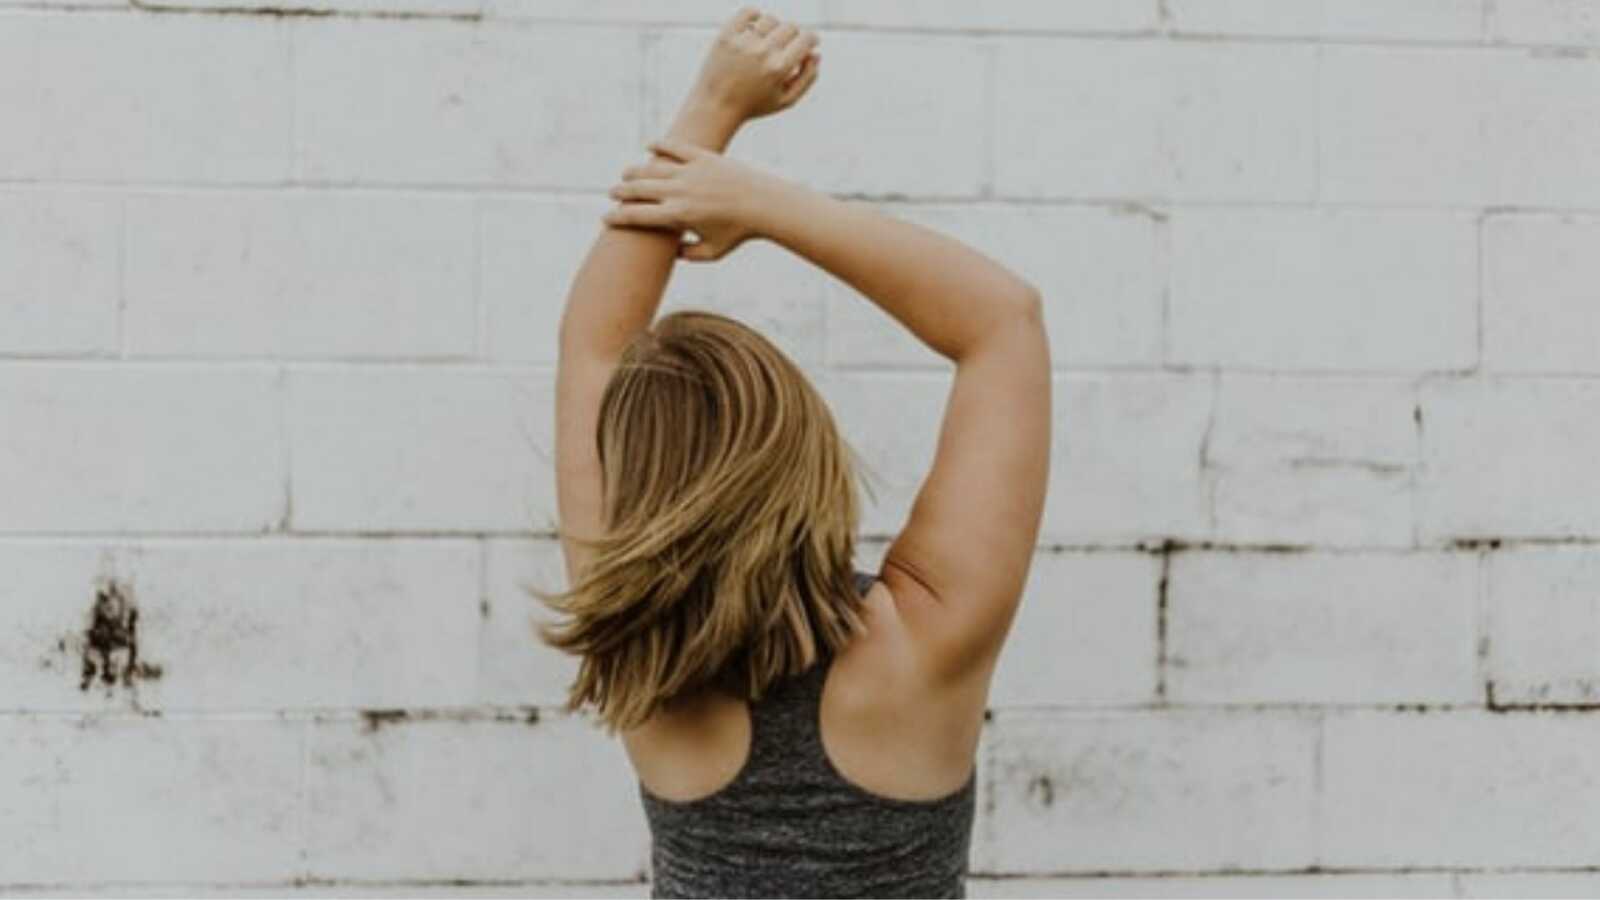 Woman dances in front a white brick wall while wearing a workout tanktop